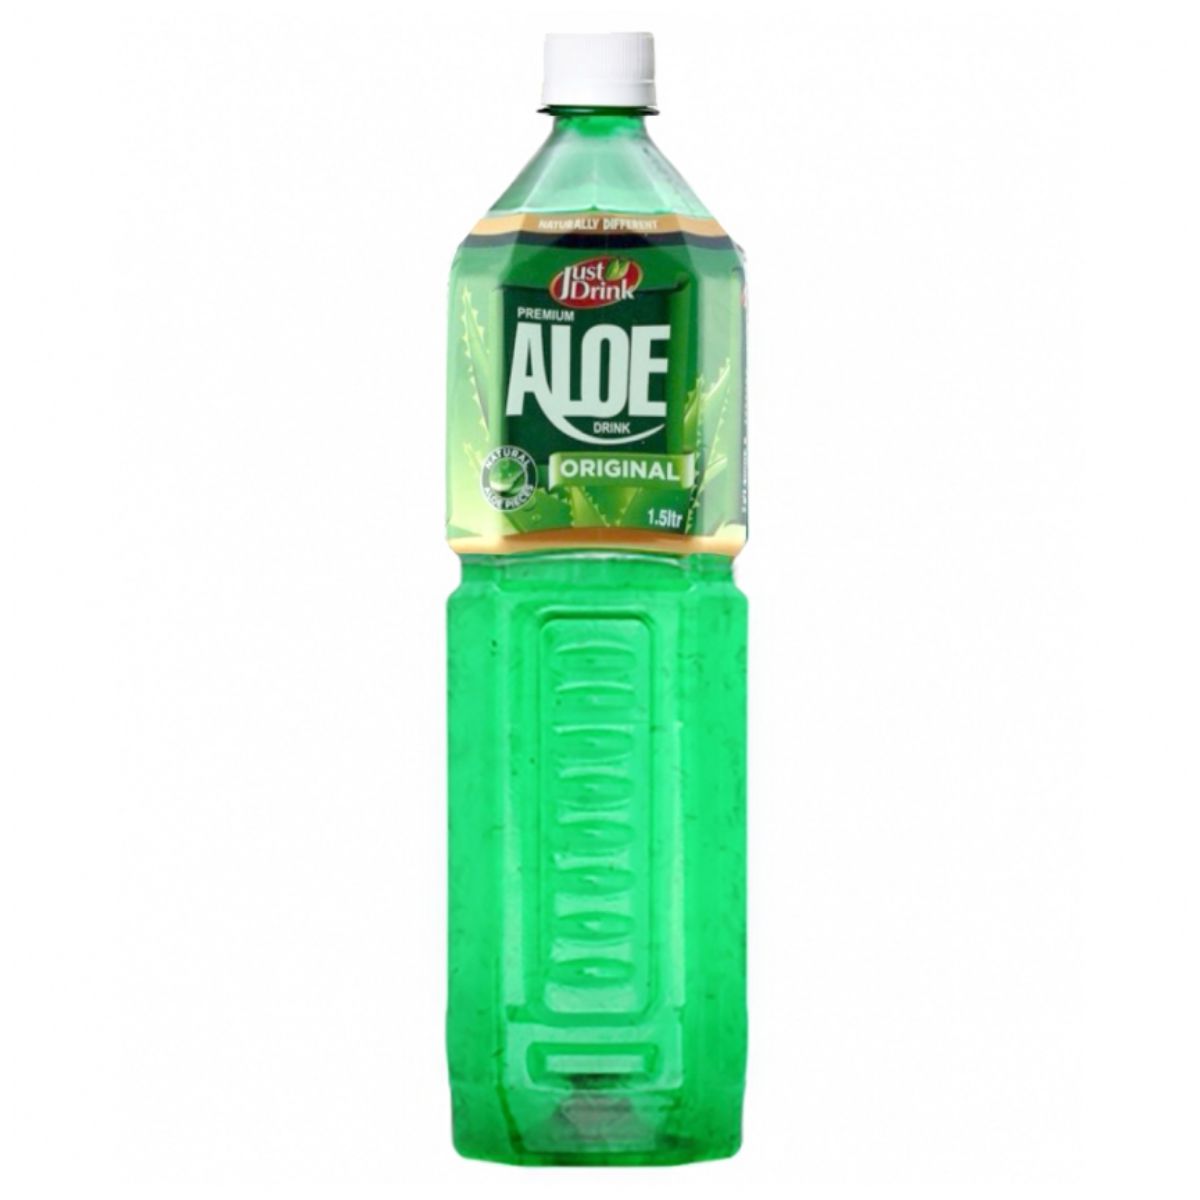 A bottle of Just Drink - Aloe Vera Original Drink - 1.5L on a white background.